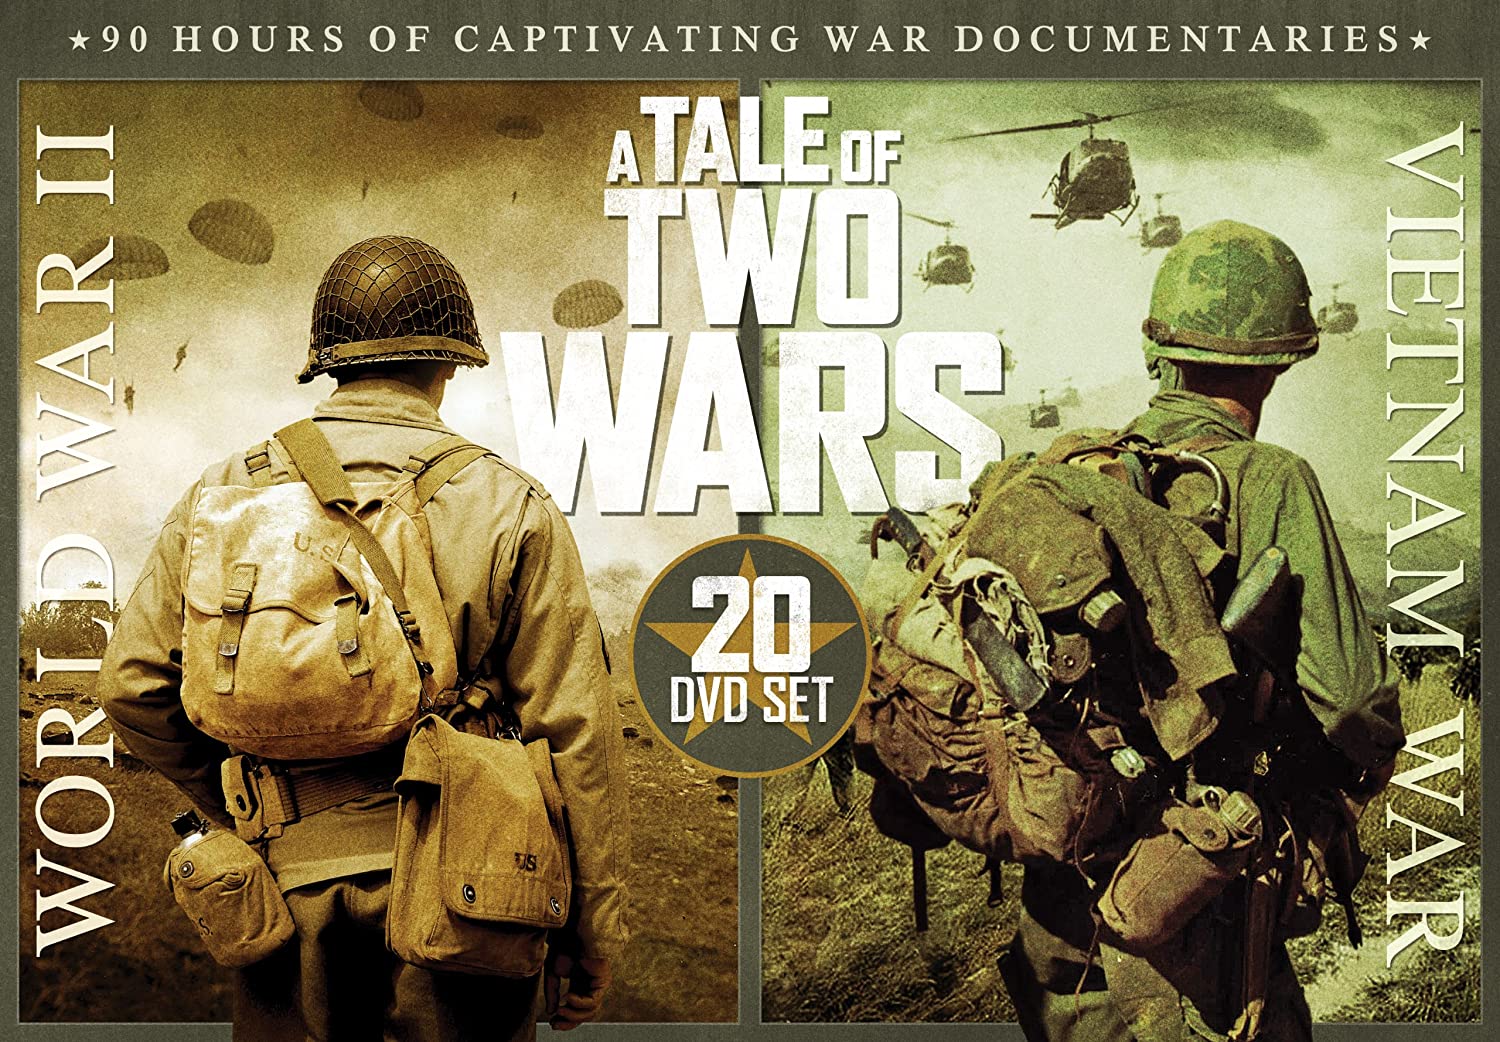 A Tale of Two Wars: WWII & Vietnam (DVD) - image 1 of 1